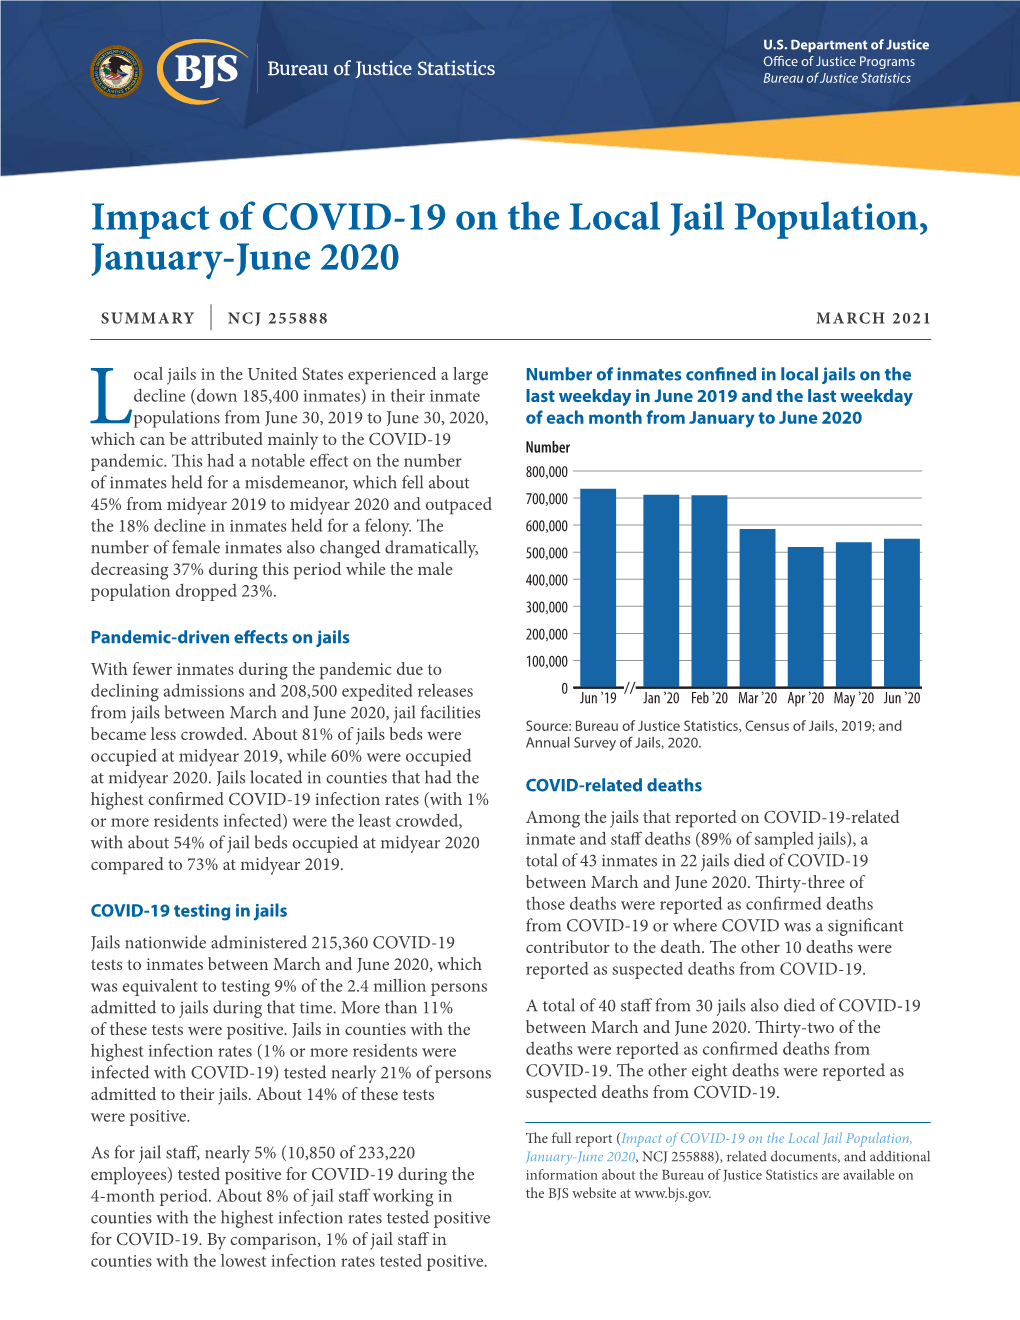 Impact of COVID-19 on the Local Jail Population, January-June 2020